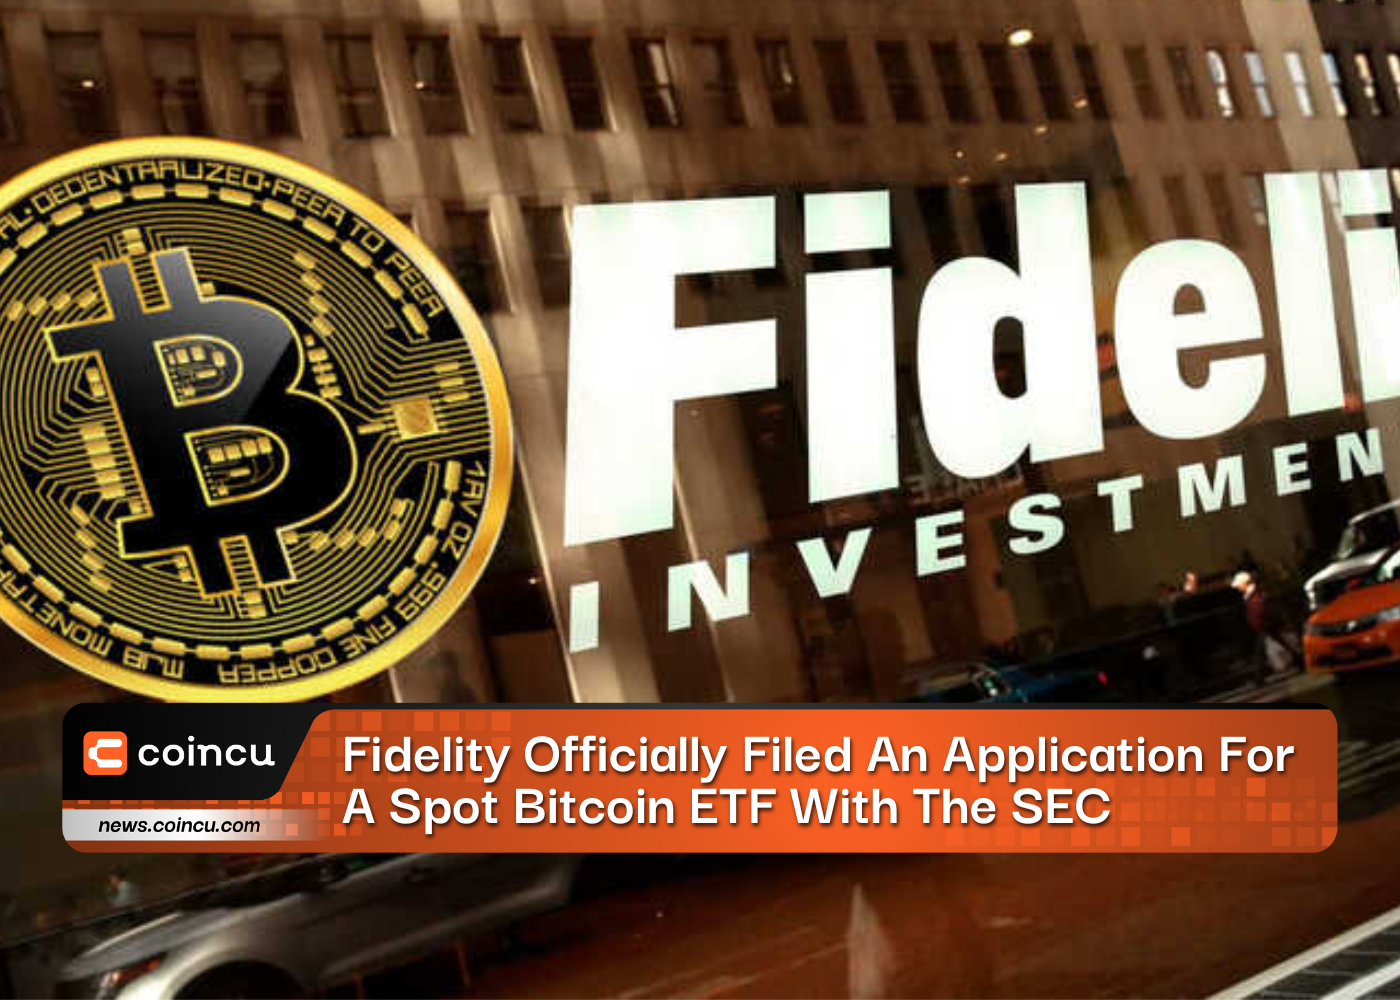 Fidelity Officially Filed An Application For A Spot Bitcoin ETF With The SEC